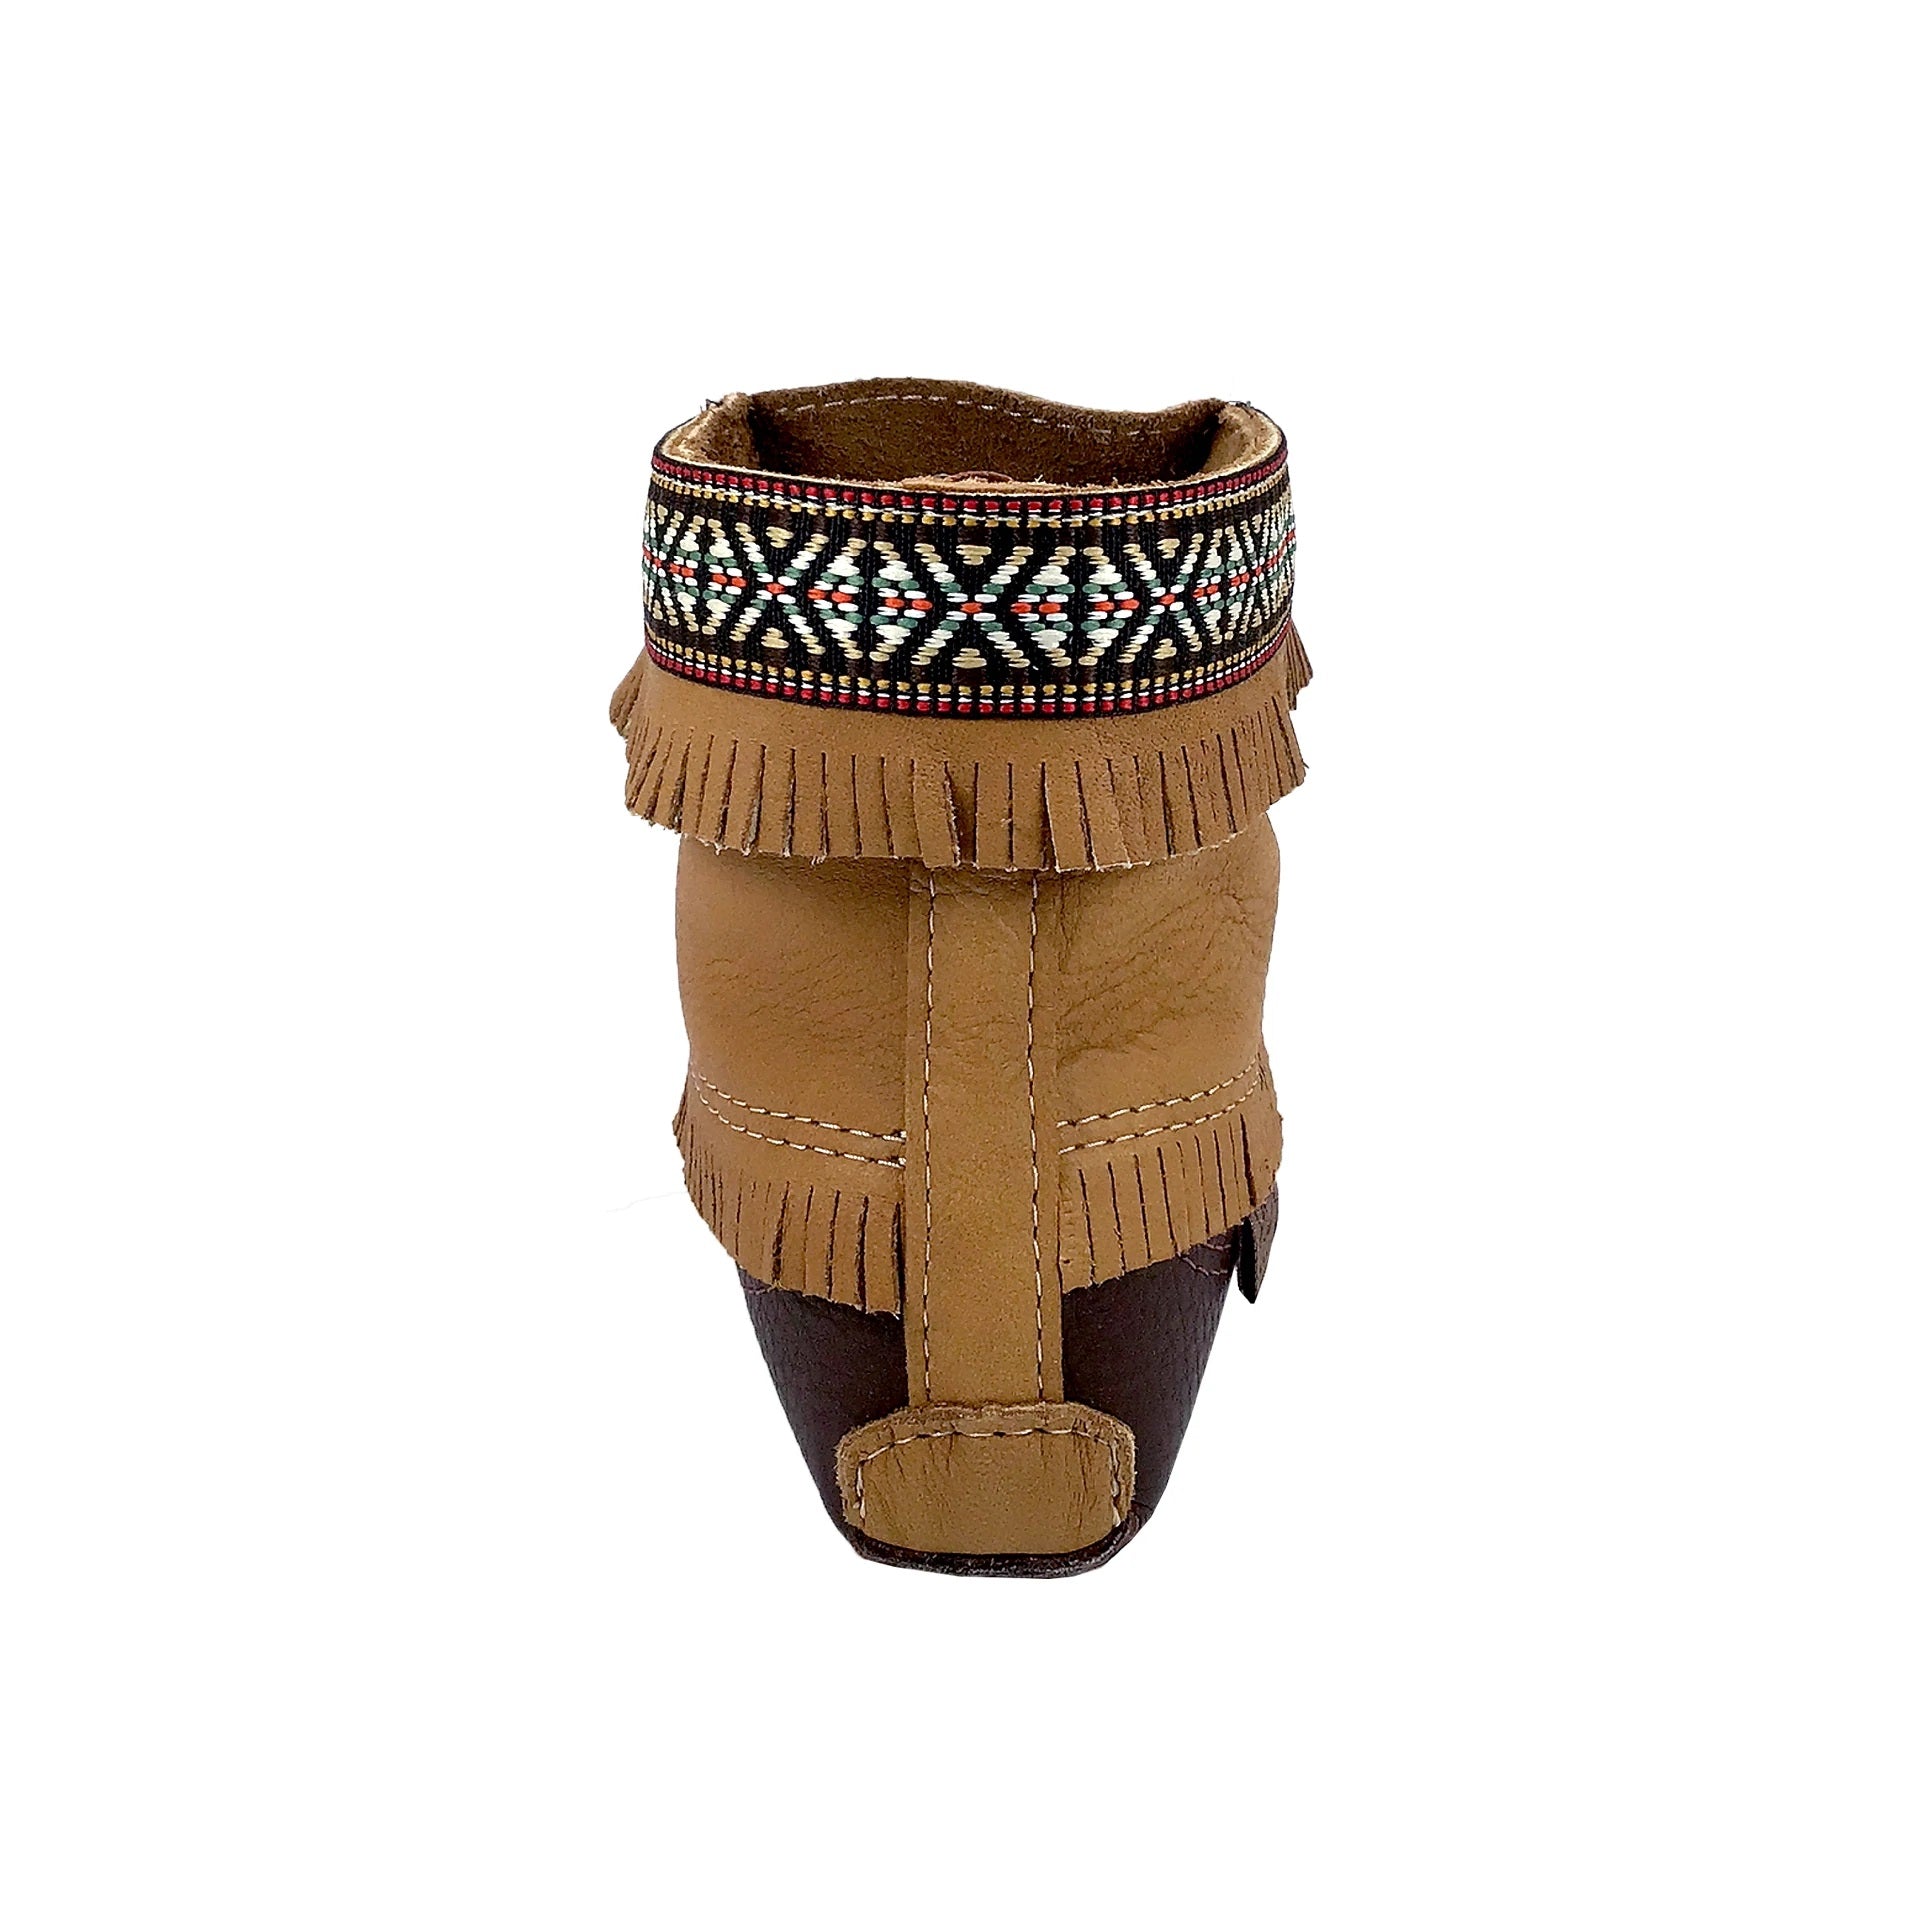 Women's Earthing Moccasin Boots